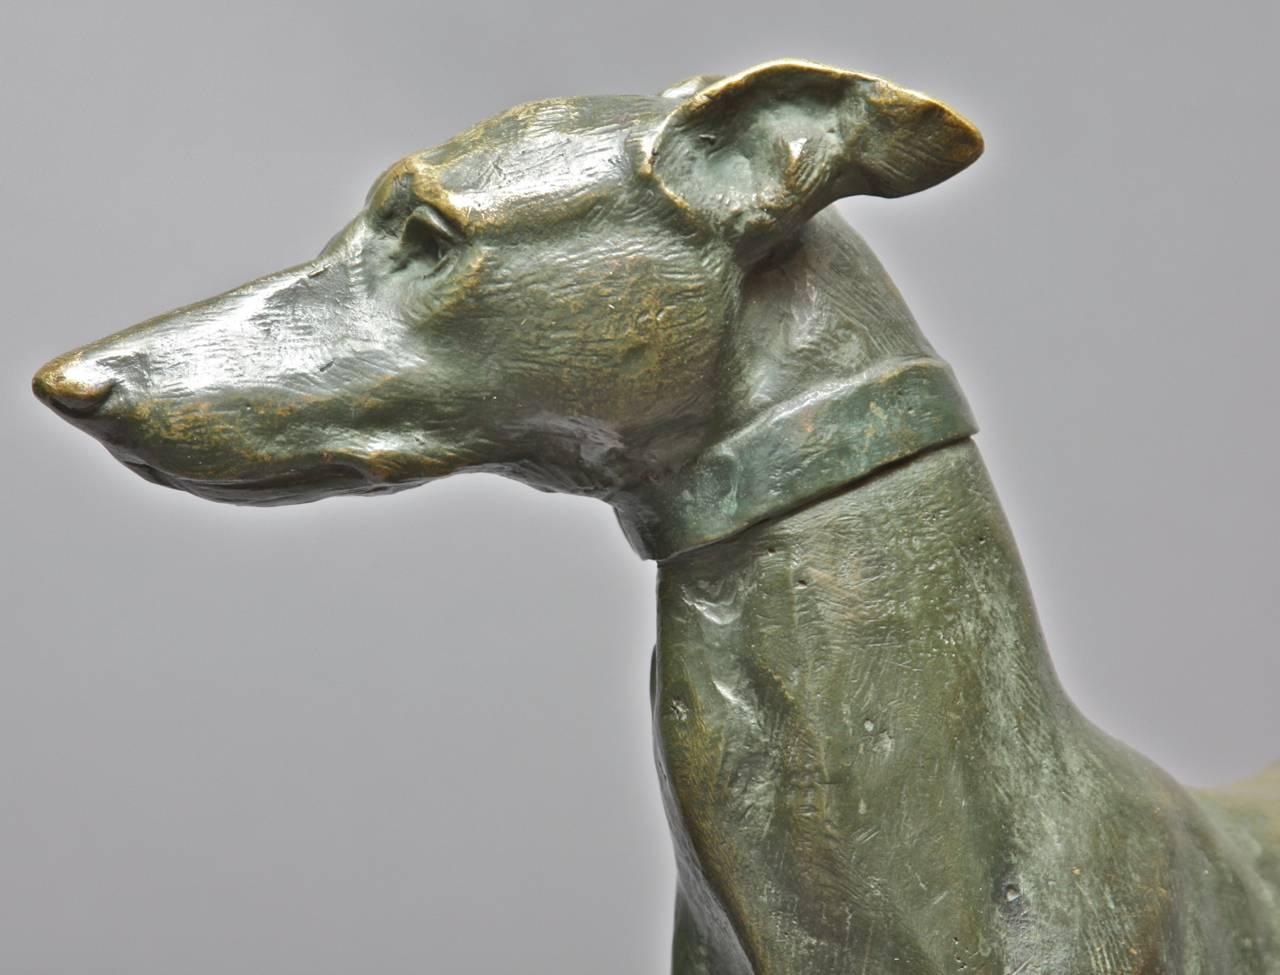 Two Whippets - Gold Figurative Sculpture by Giacomo Merculiano